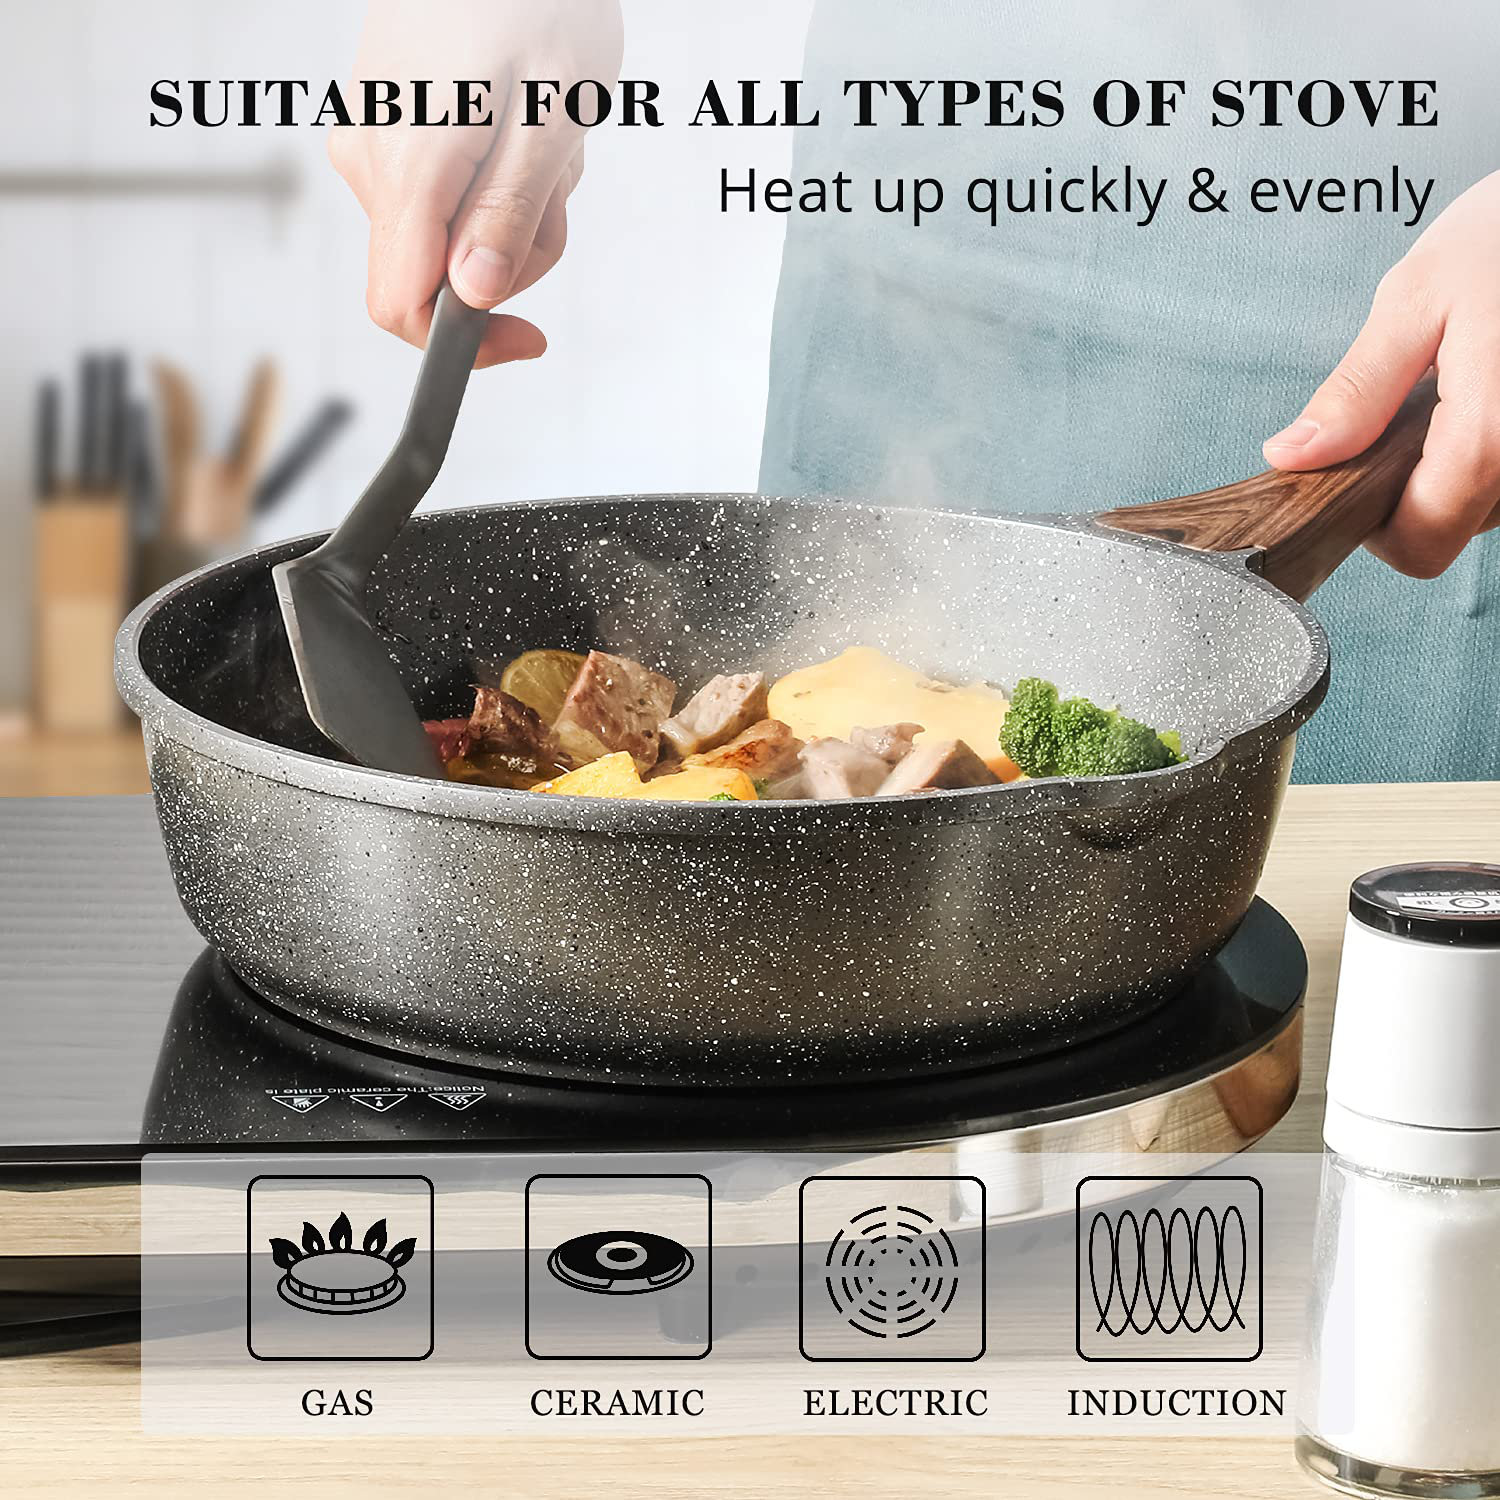  Cyrret Stone Frying Pan 12 inch, Nonstick Omelette Pan with  100% APEO&PFOA-Free, Stone Non Stick Coating, Granite Skillet Pan for  Cooking, Nonstick Skillet Frying Pan, Suitable for All Stoves: Home 